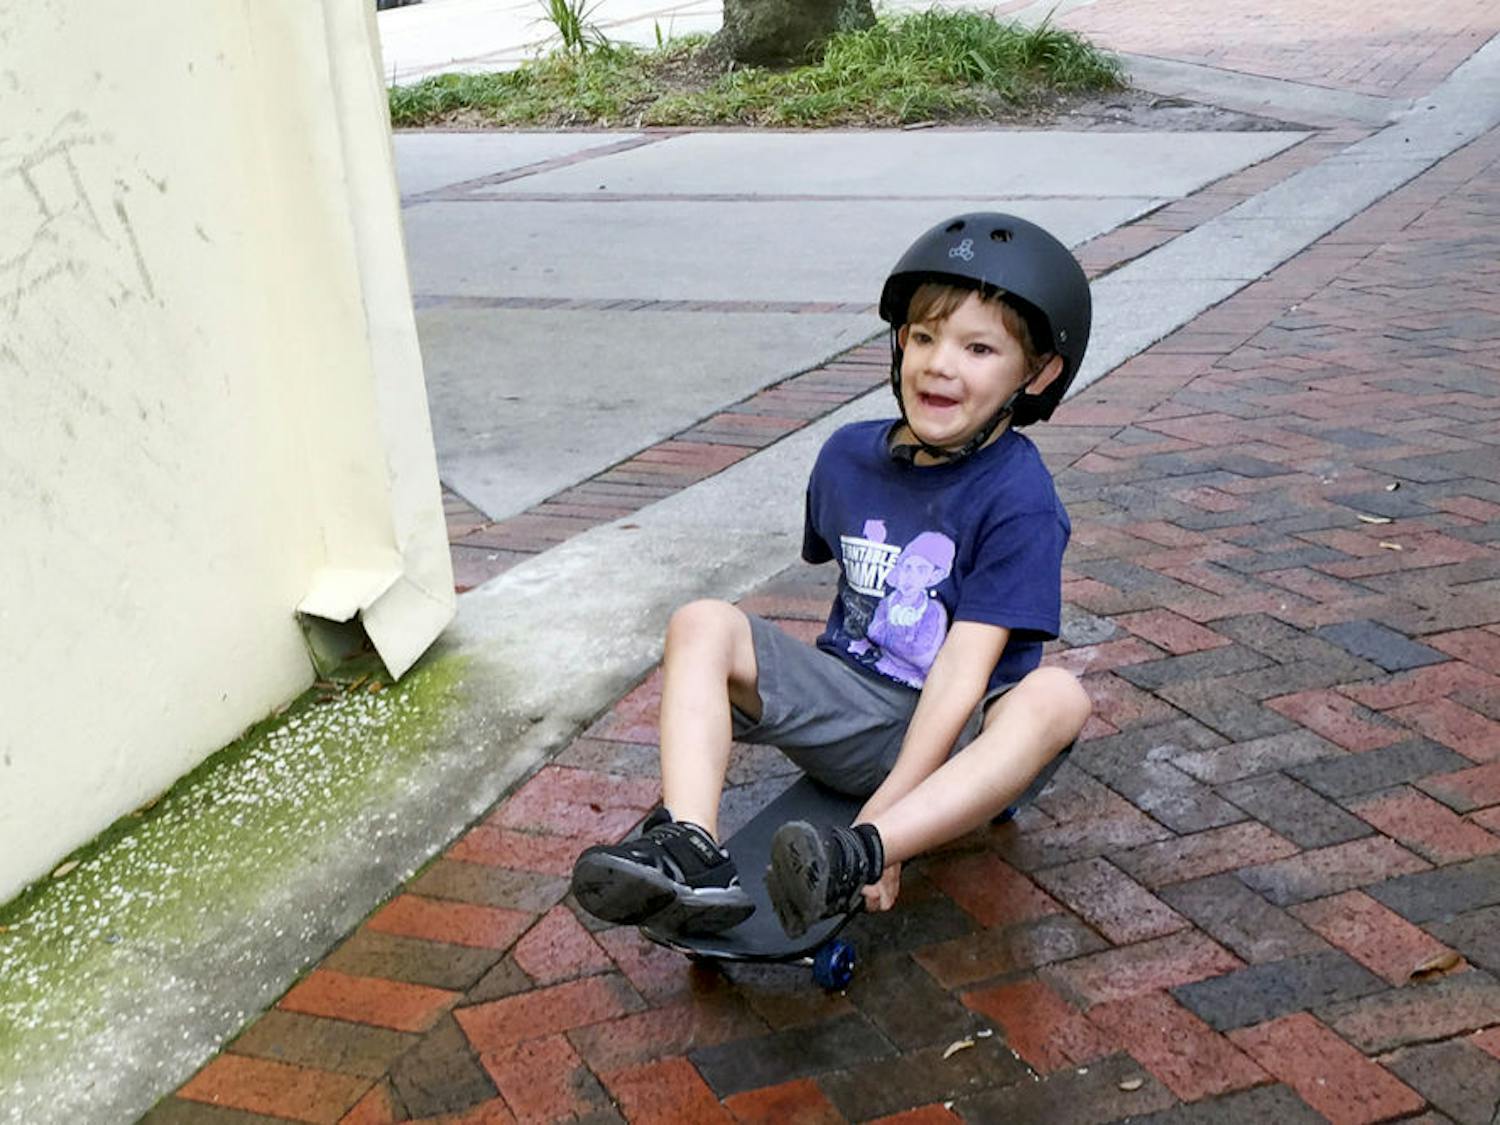 Aedyn Martinez, 6, rides his skateboard next to the Alachua County Public Library on Sunday morning. Aedyn was attending Active Streets, an event which closed nine blocks of University Avenue so that people could enjoy the streets without moving vehicles.